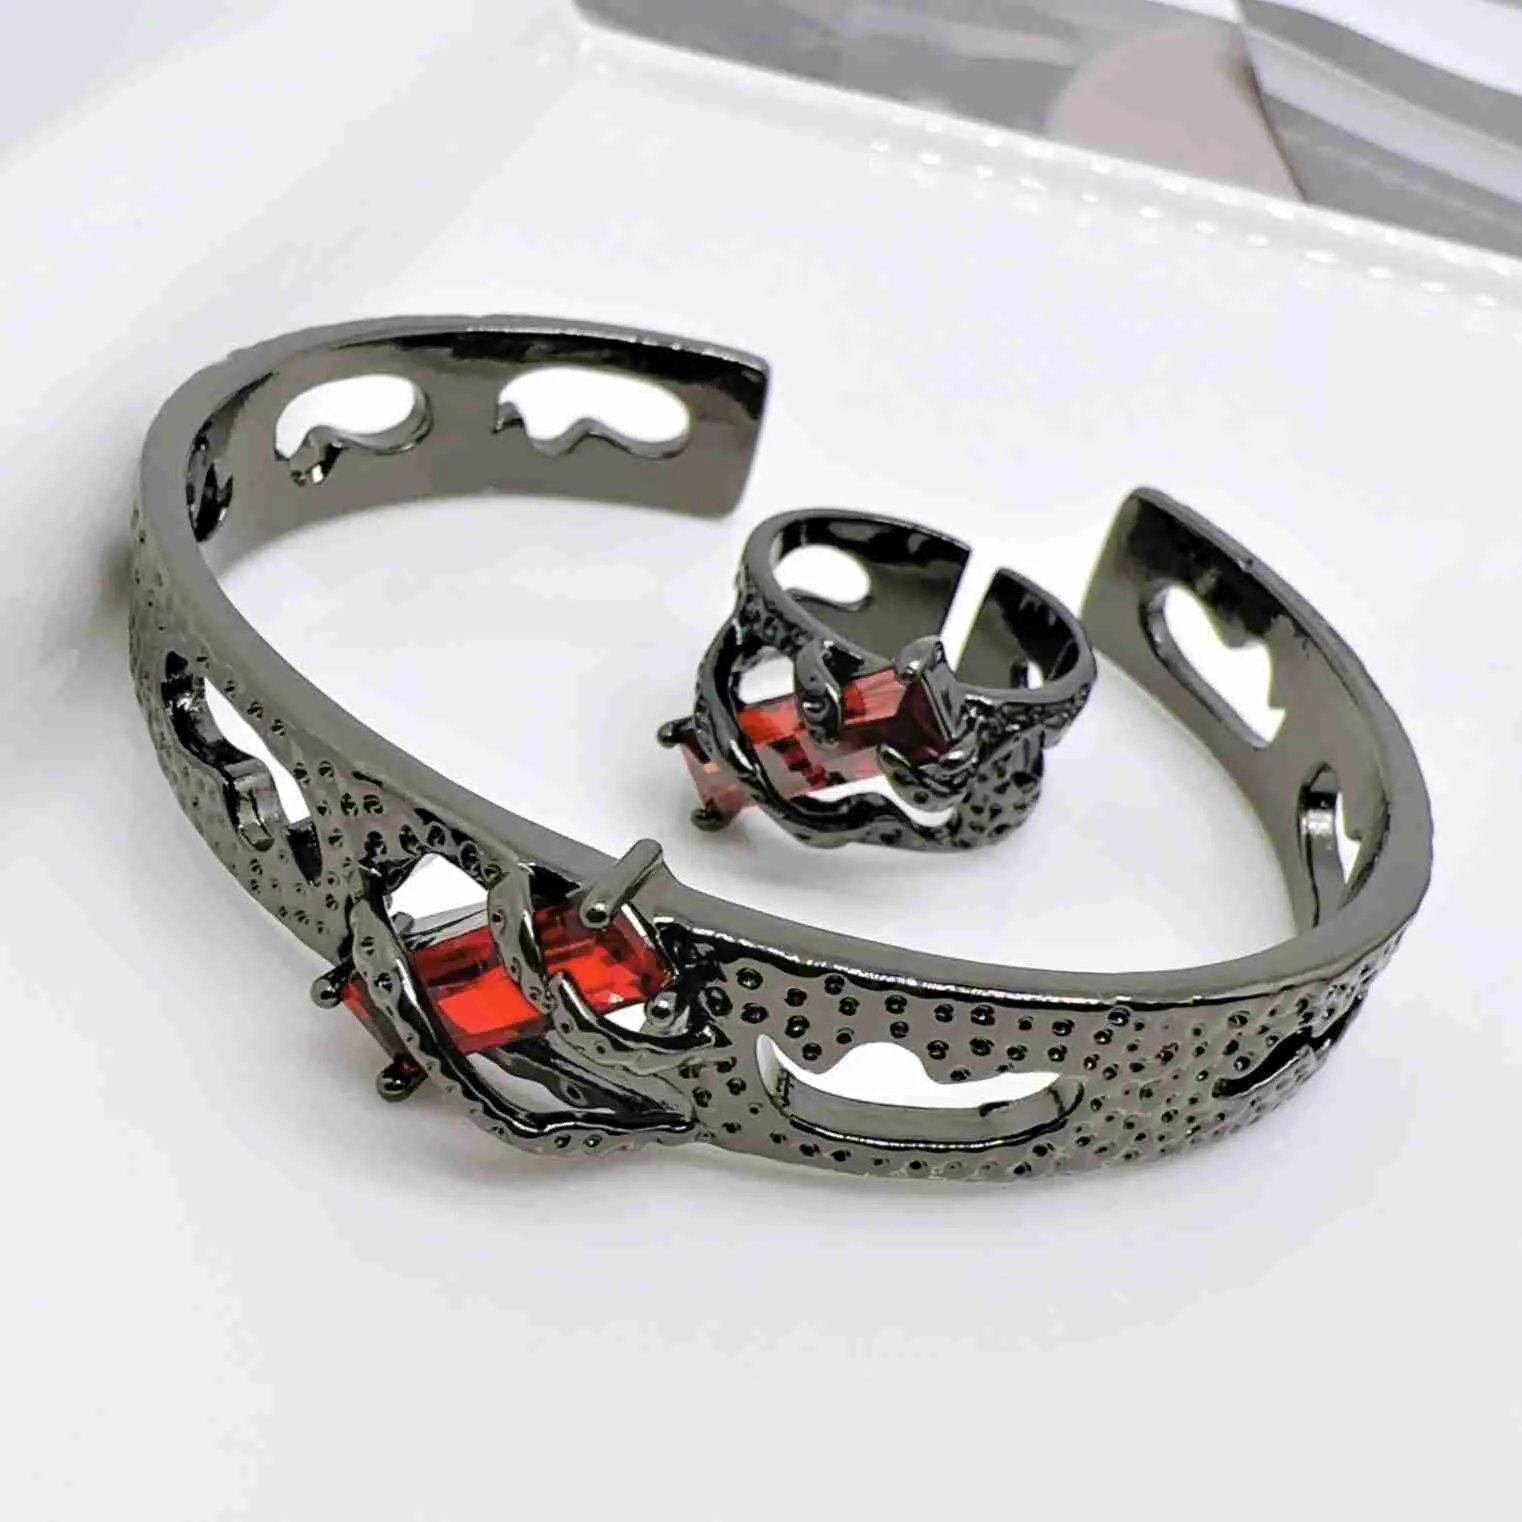 S925 Silver Hollow Bracelet Ring Small and Unique Fashion Cool Bracelet Accessories for Men and Women